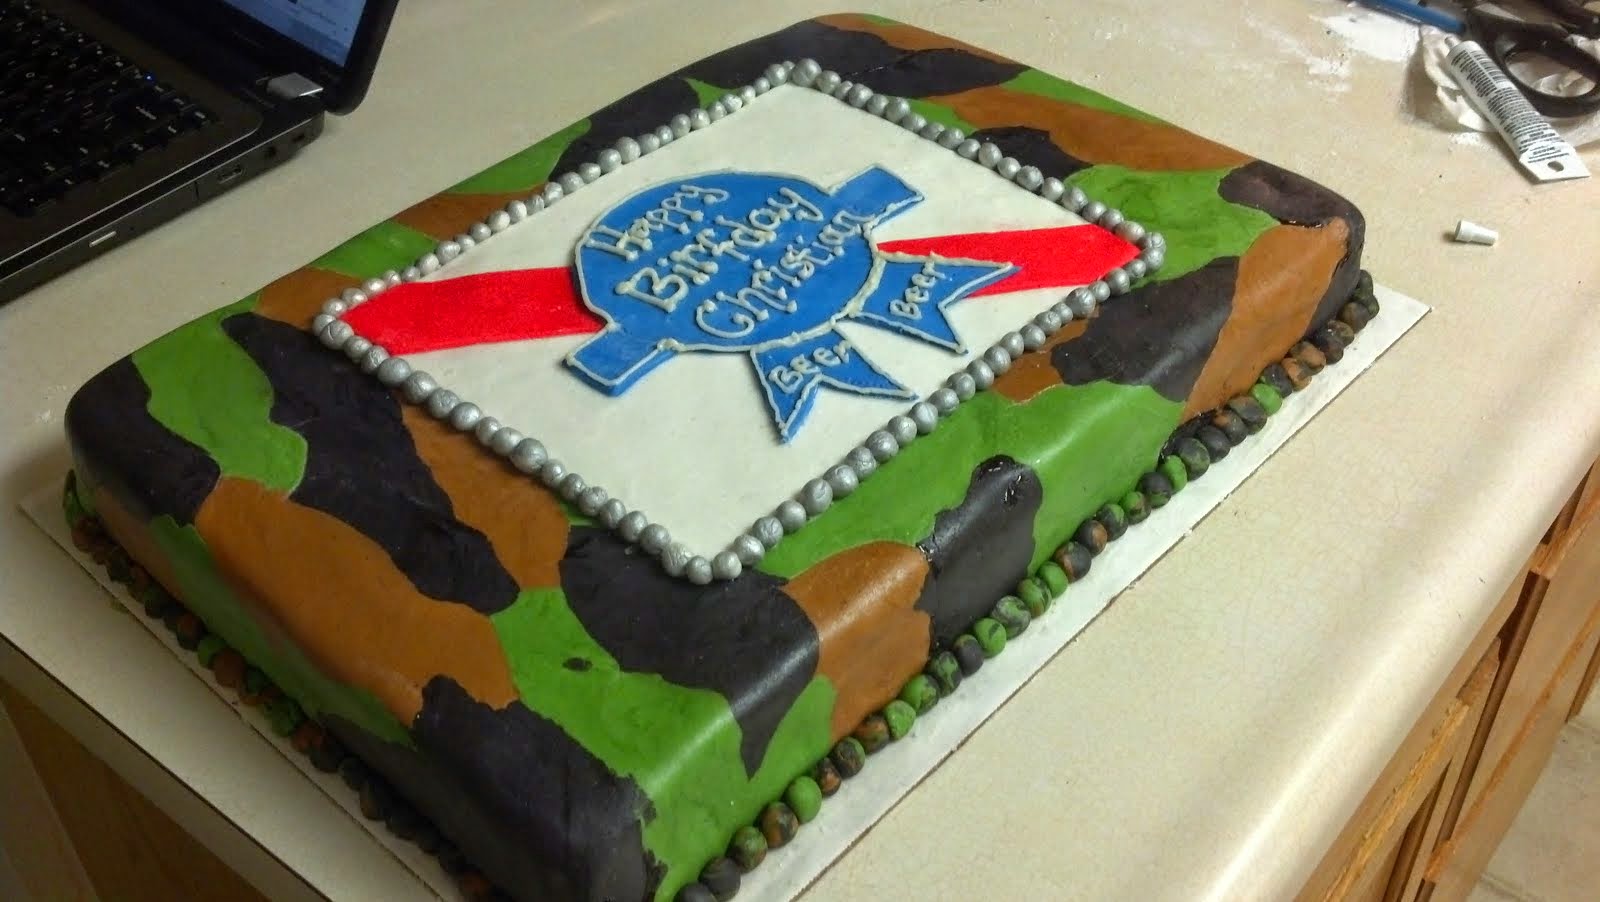 Camo and Beer Cake